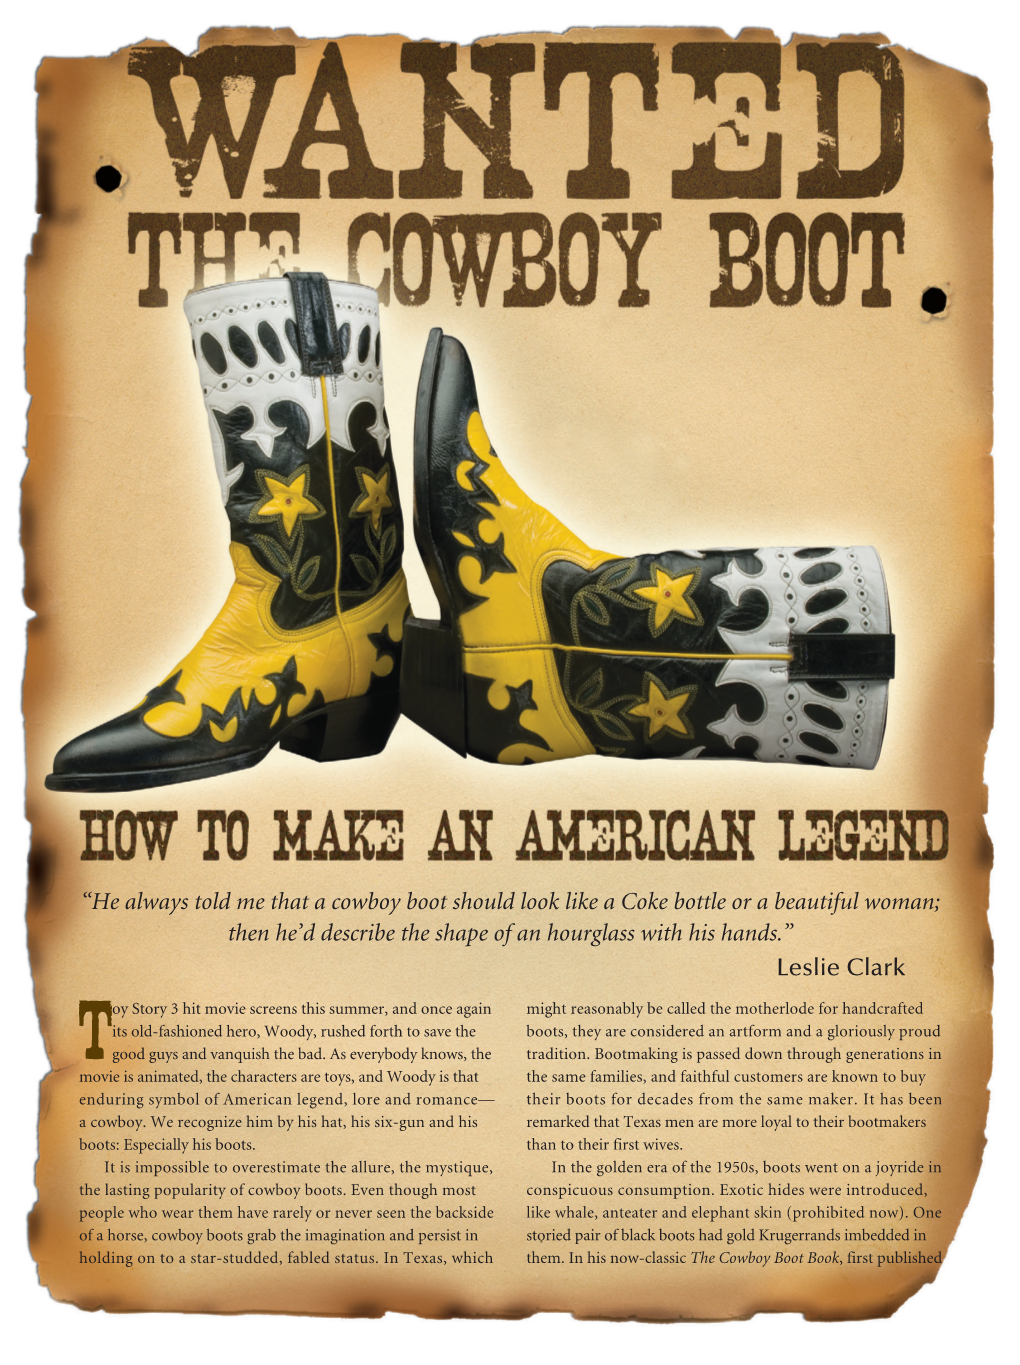 Leslie Clark “He Always Told Me That a Cowboy Boot Should Look Like A